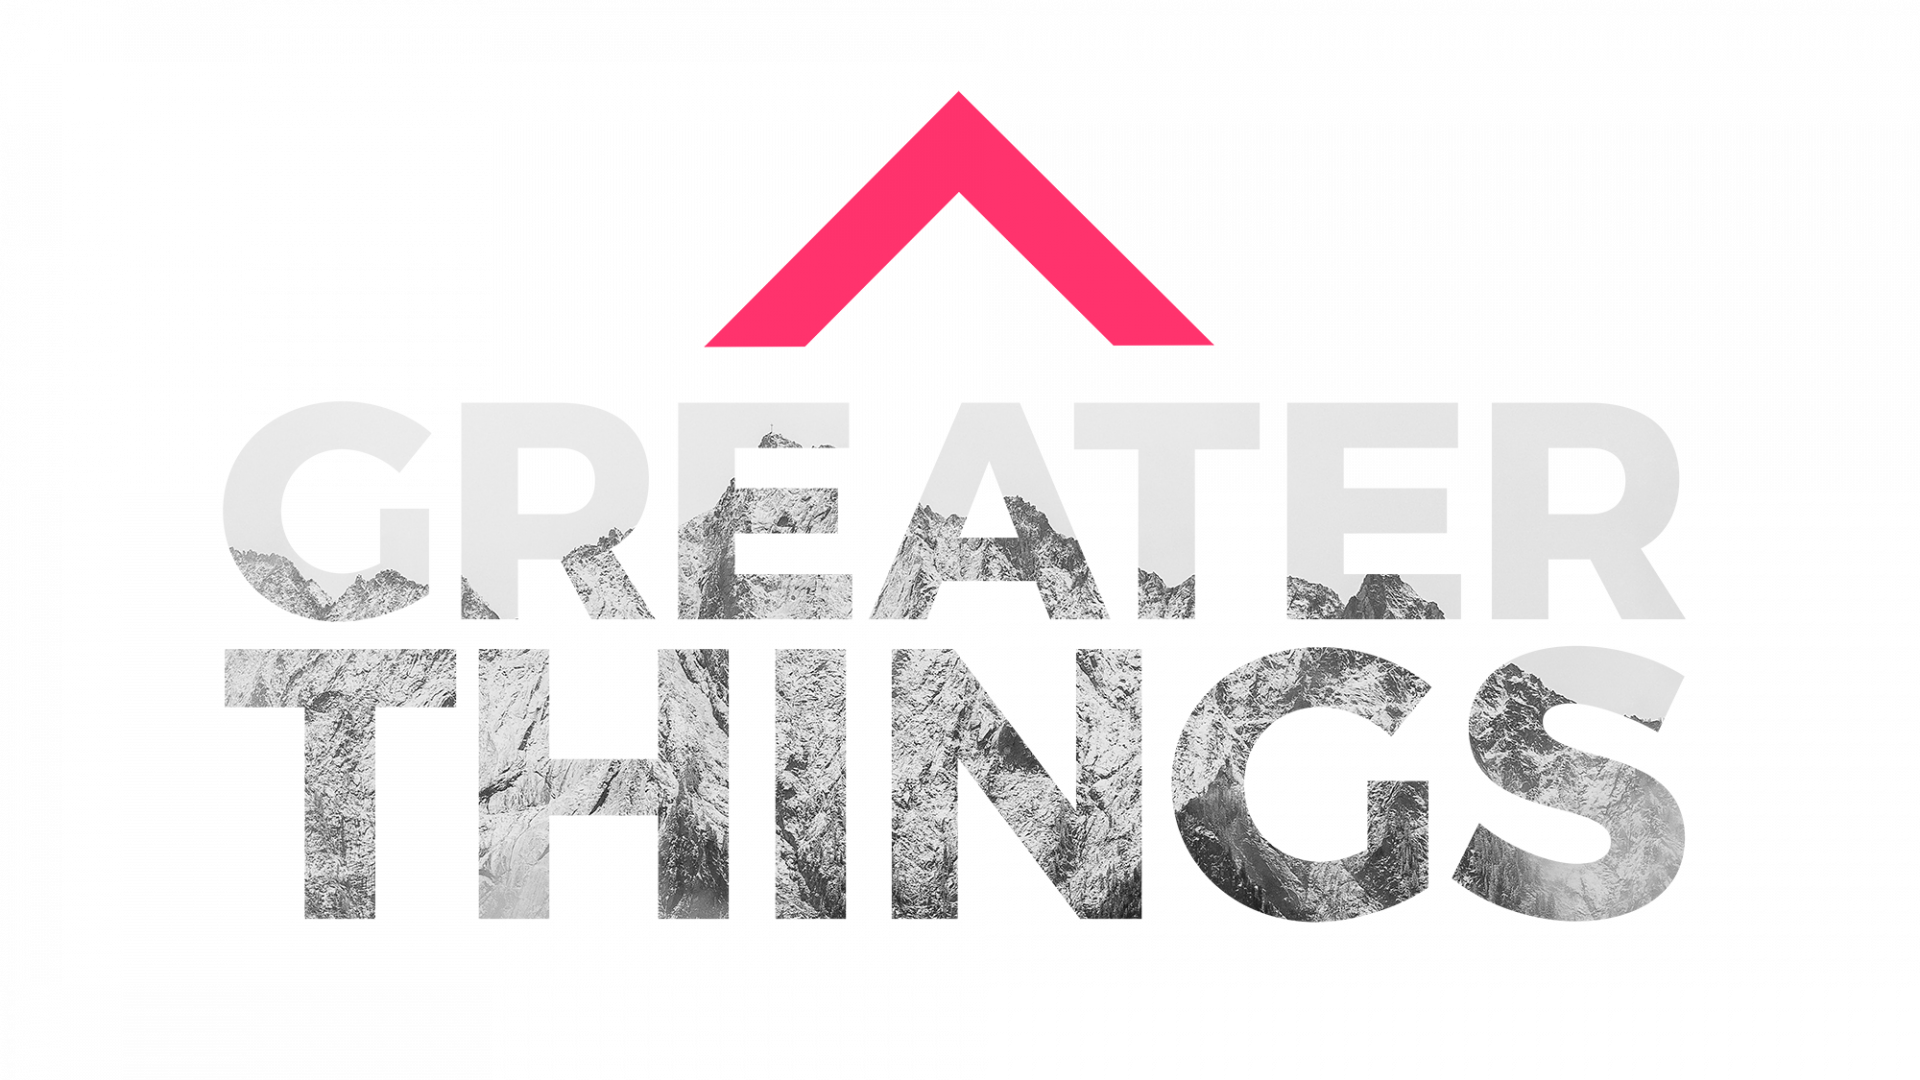 Greater Things Conference 2022 Global Awakening